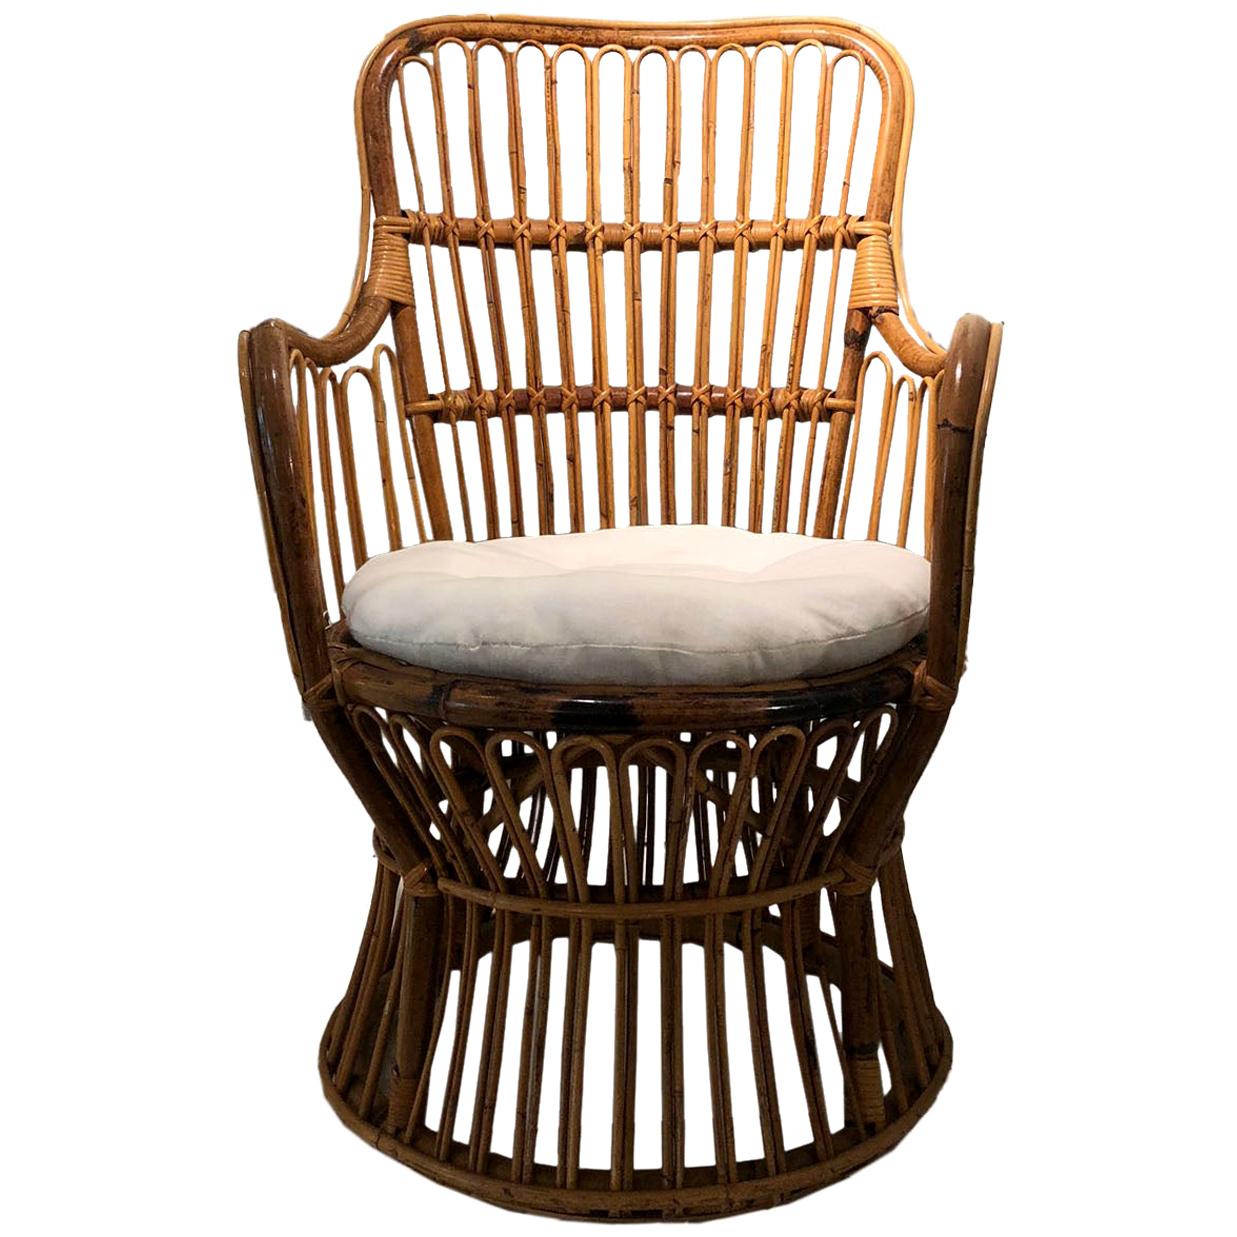 Vintage Coastal Rattan Chair with New Upholstered Cushion